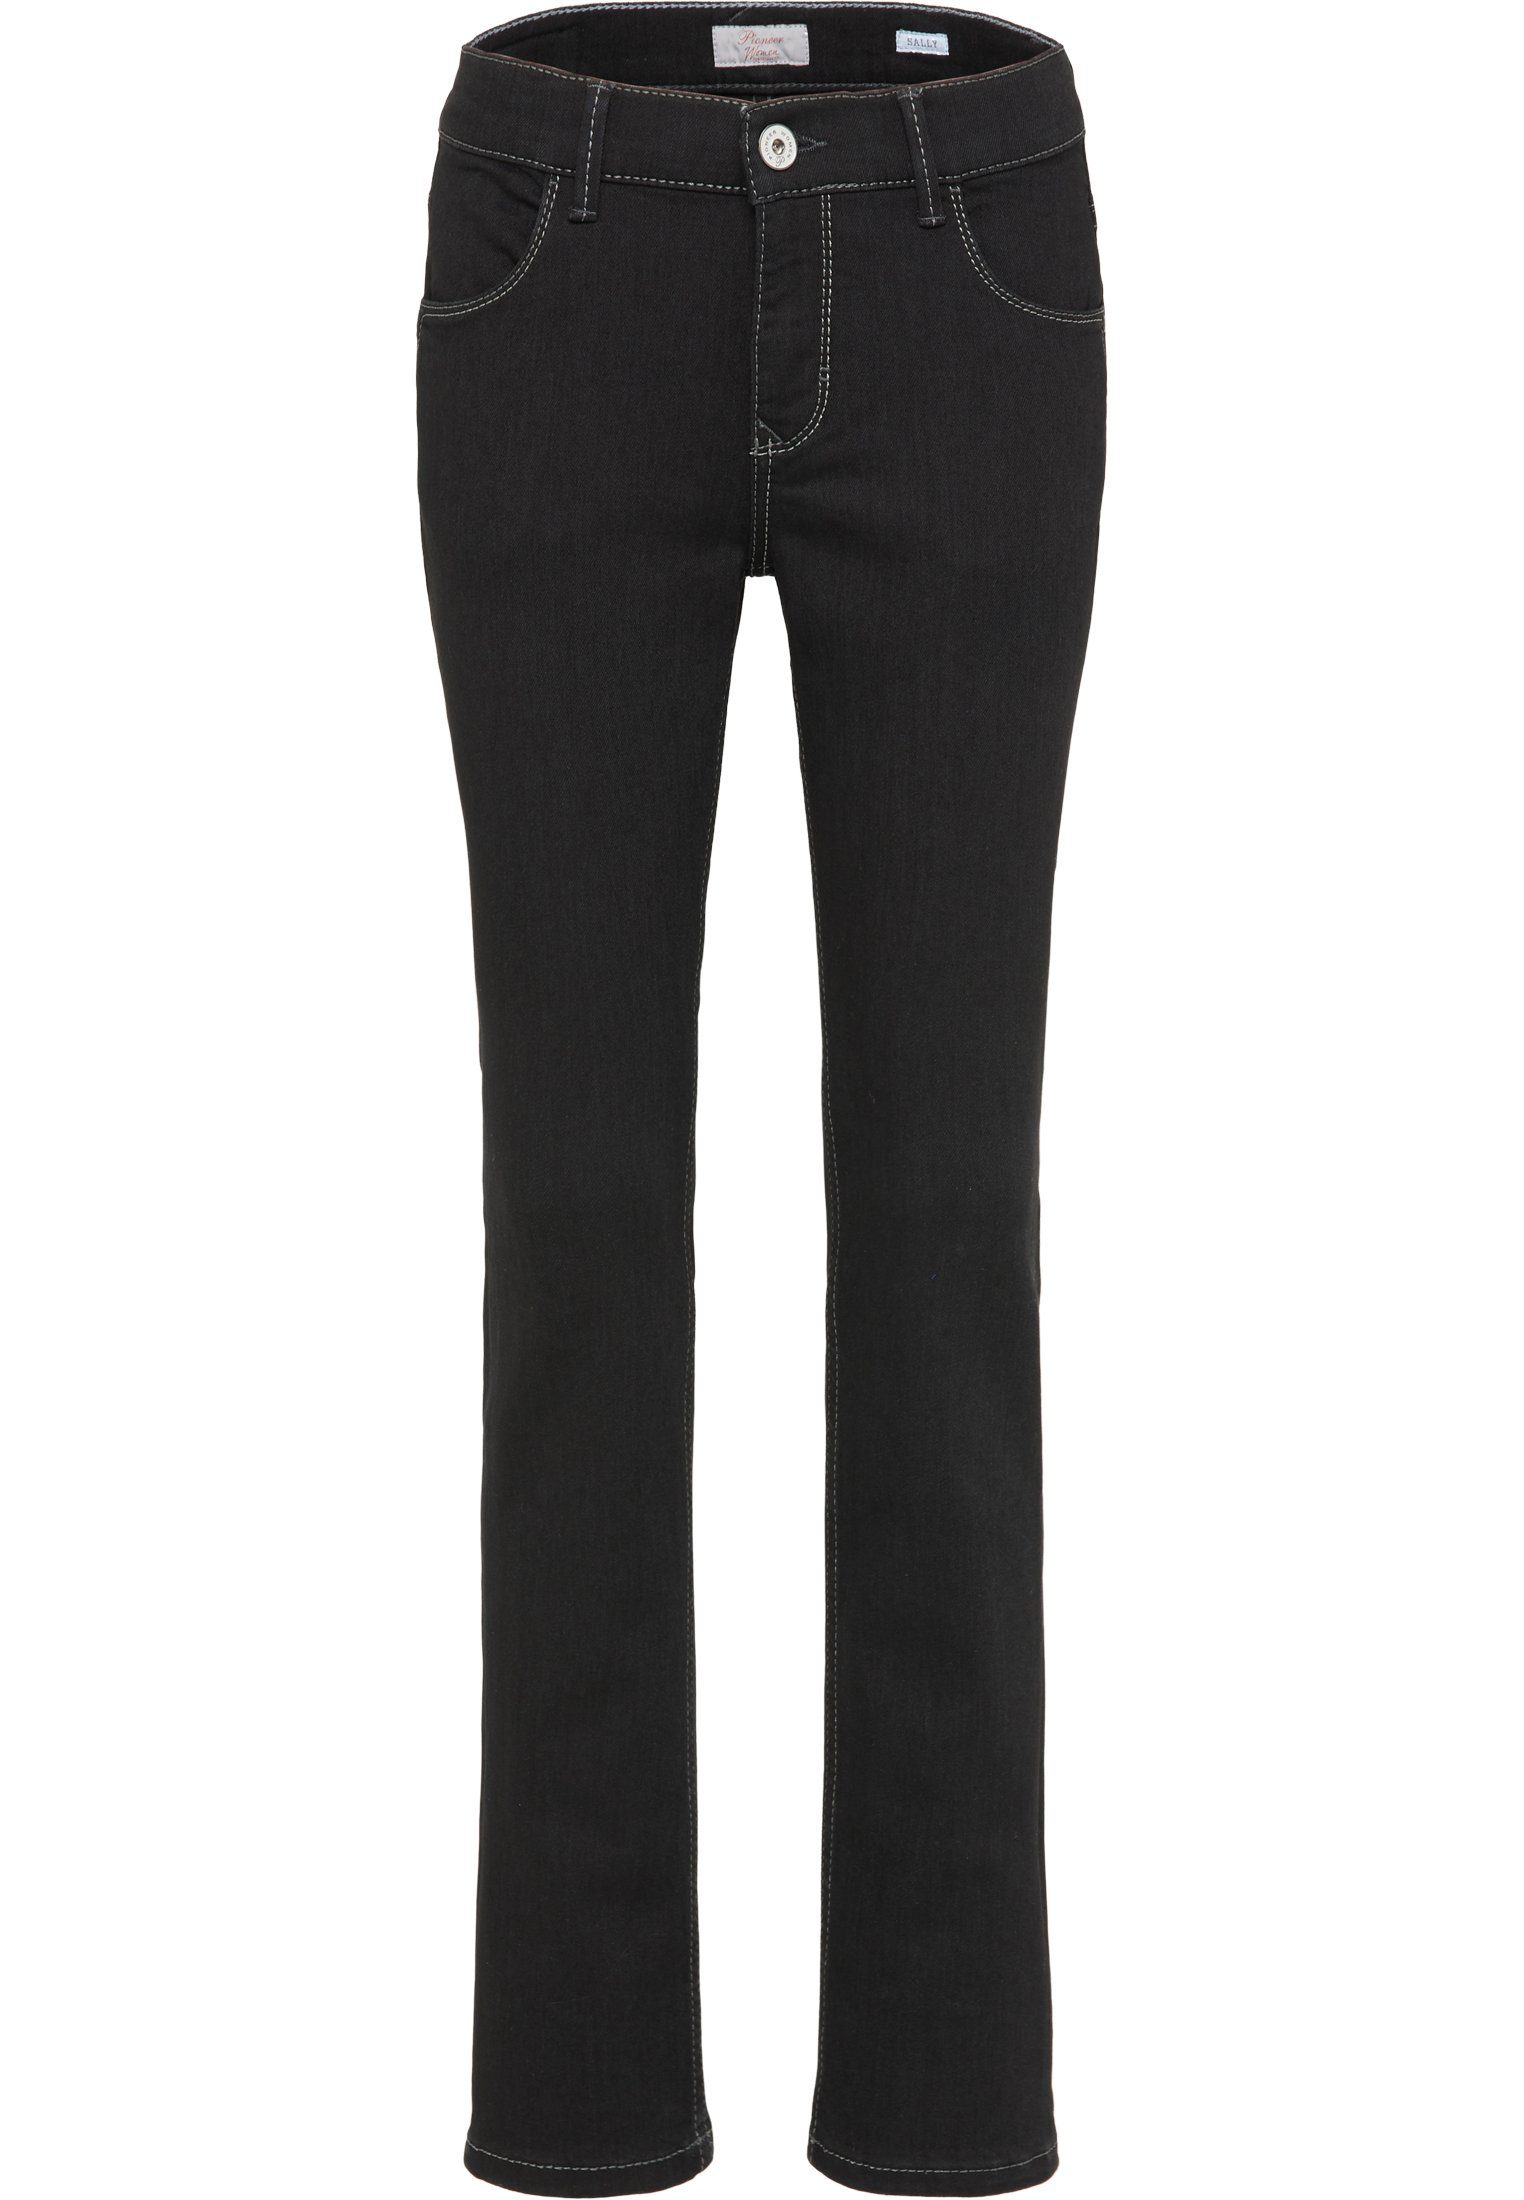 POWERSTRETCH 5012.11 Pioneer 3290 Authentic Stretch-Jeans SALLY - black Jeans PIONEER